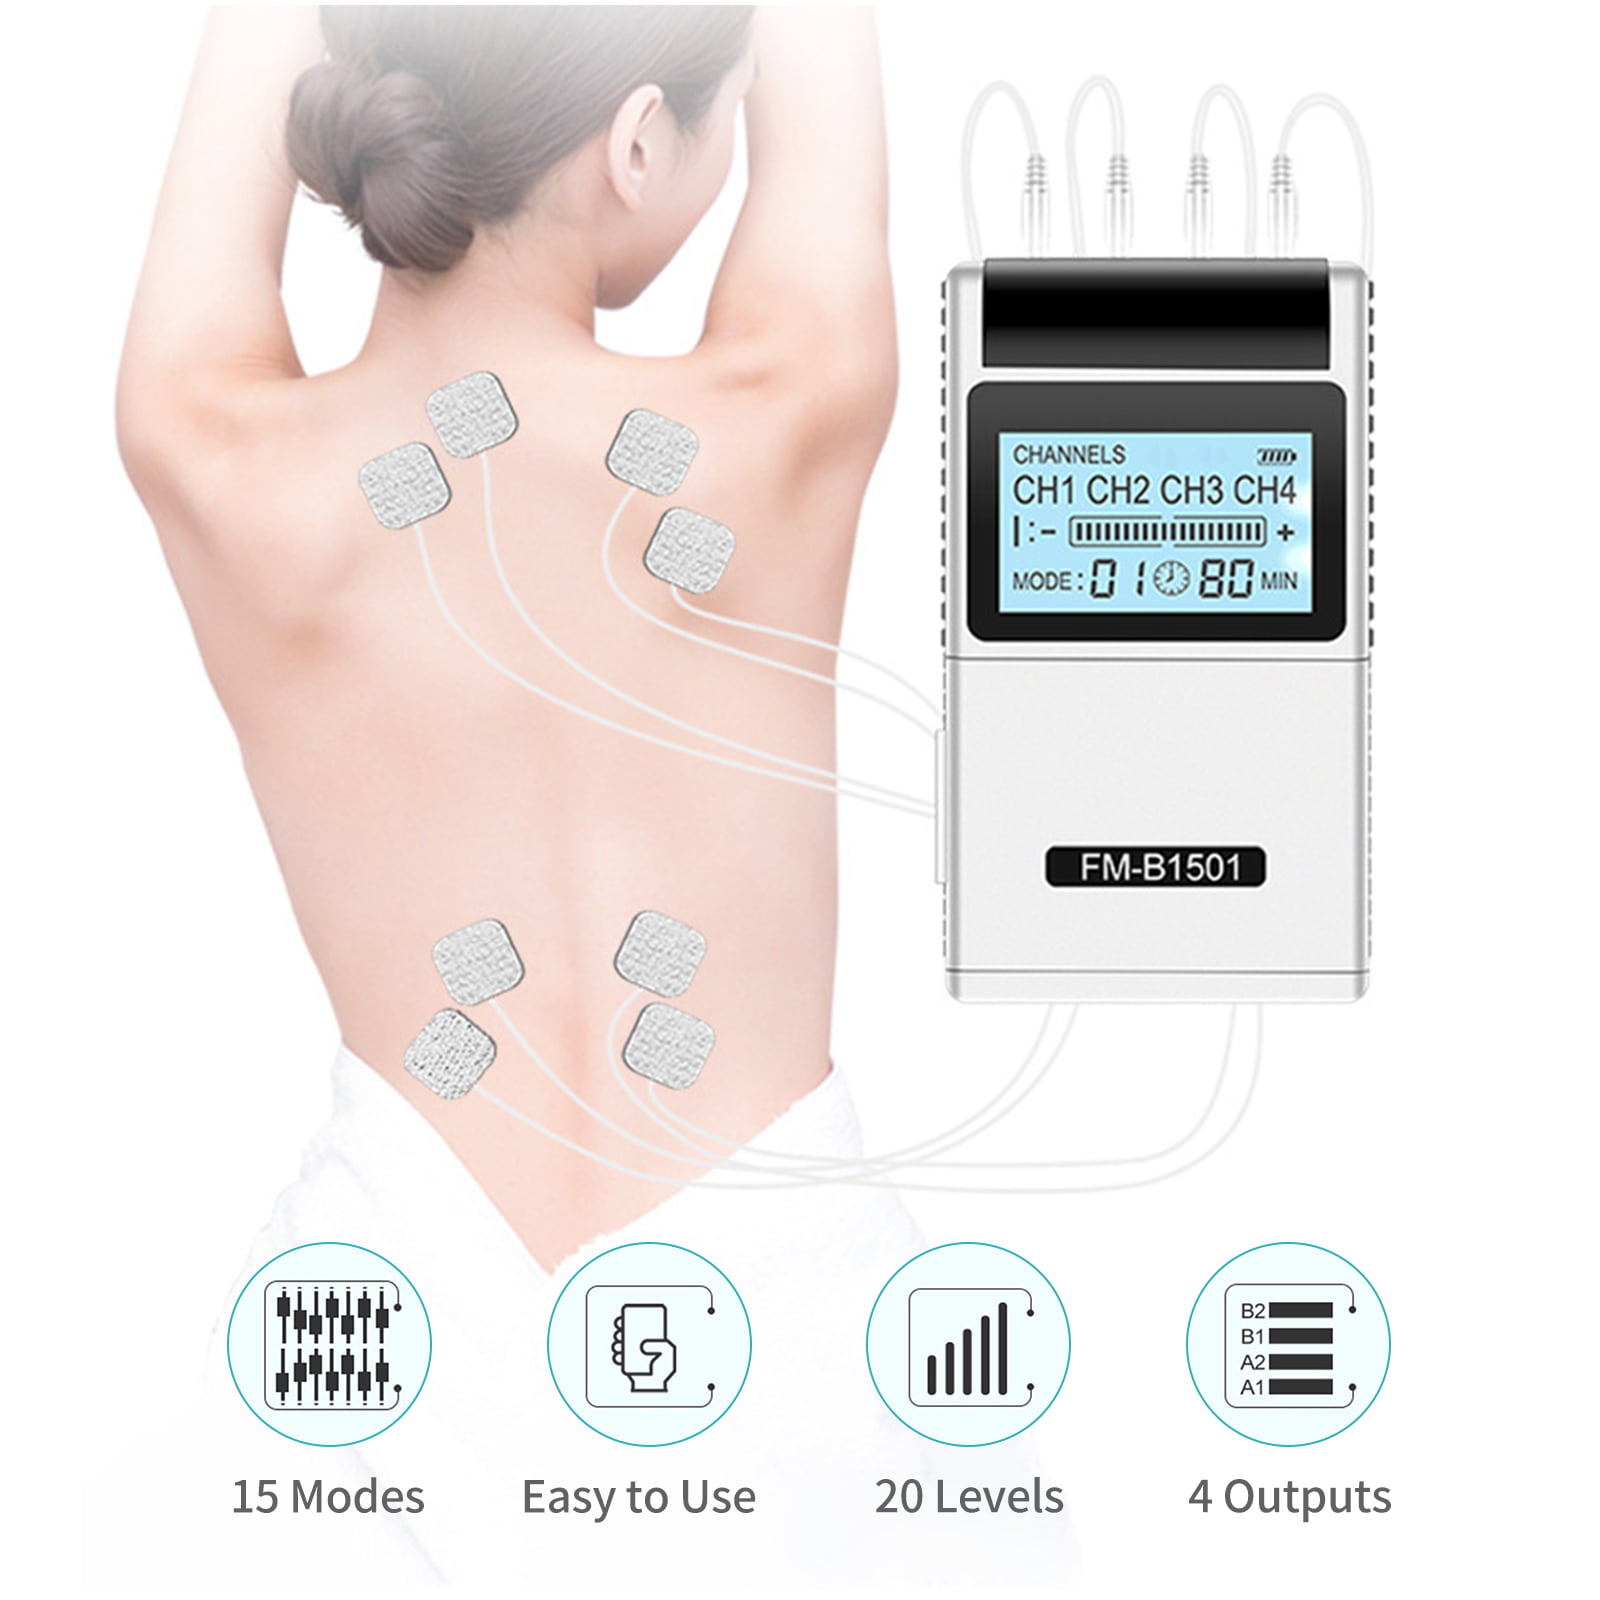 TENS 7000 4 channel 15 modes pain relief tens unit home use